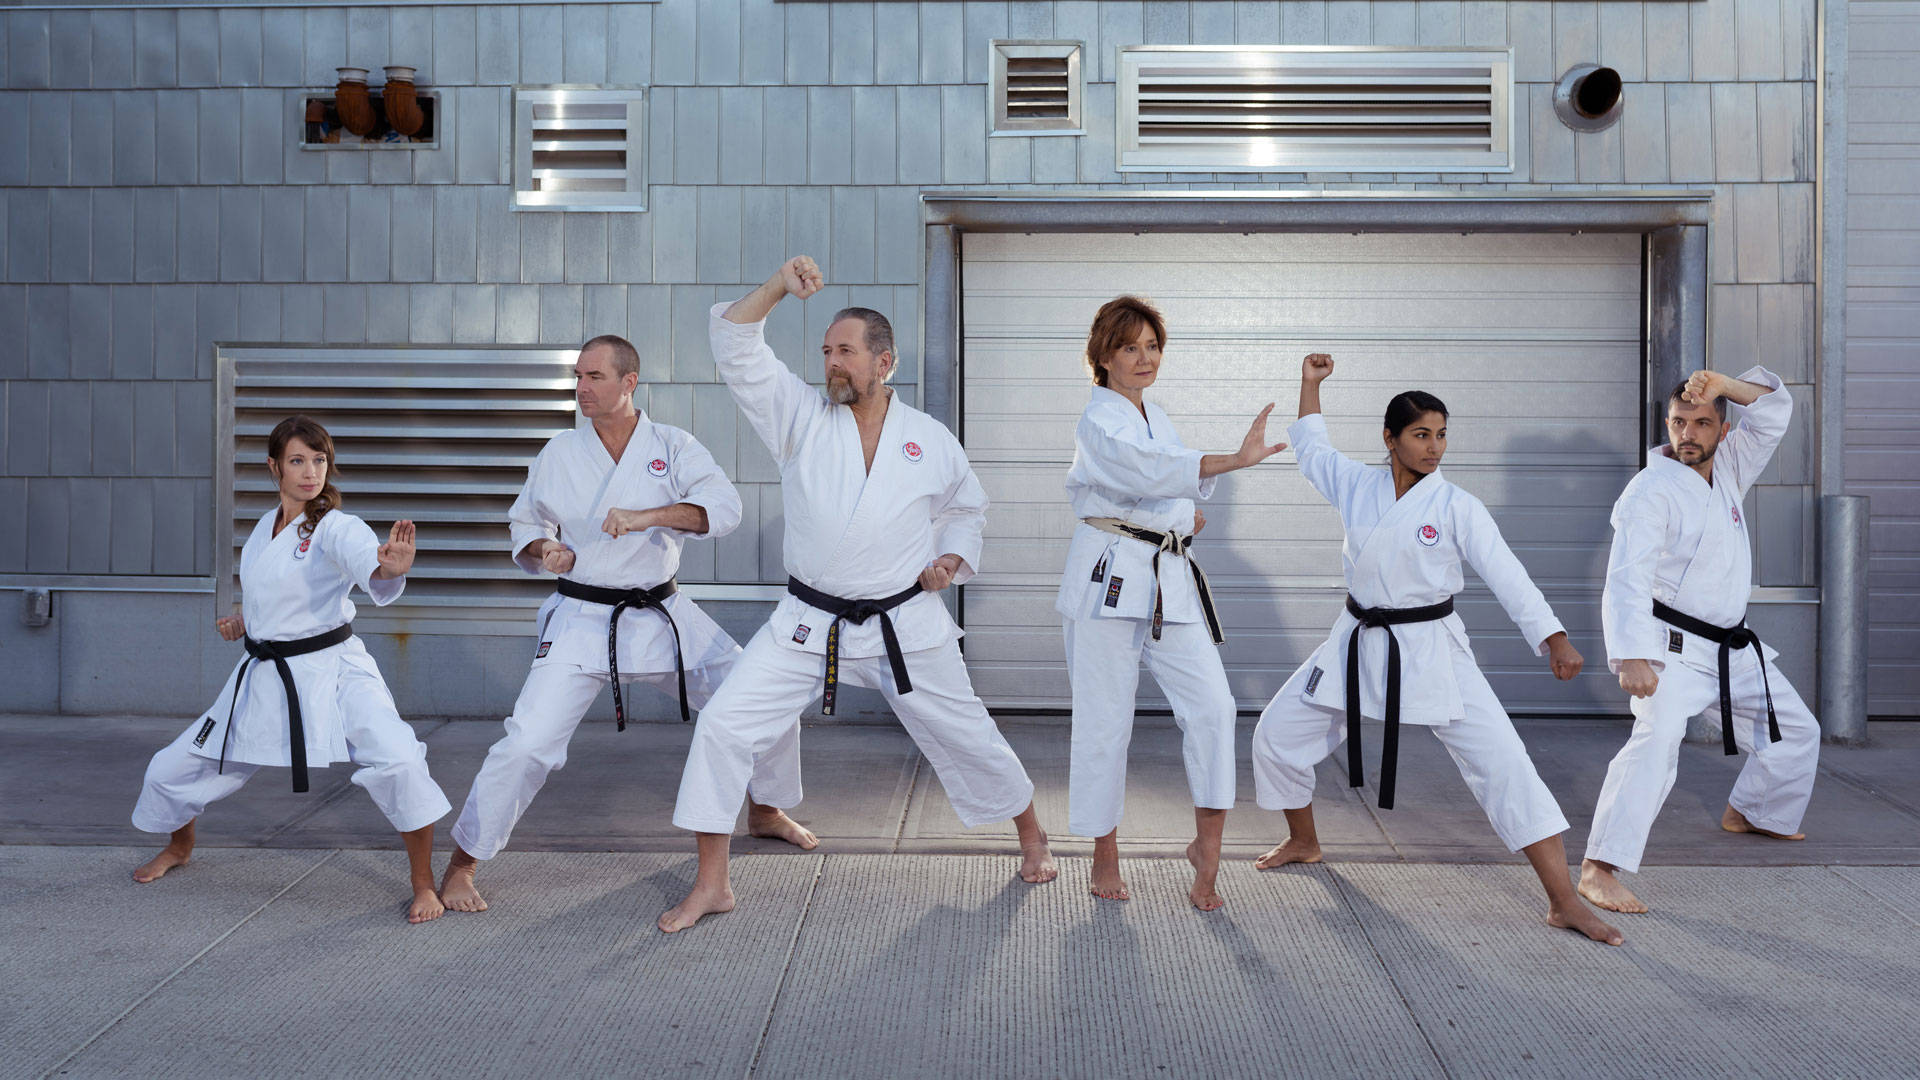 Karate People Doing Poses 2pogwne7nlvvlm2h 